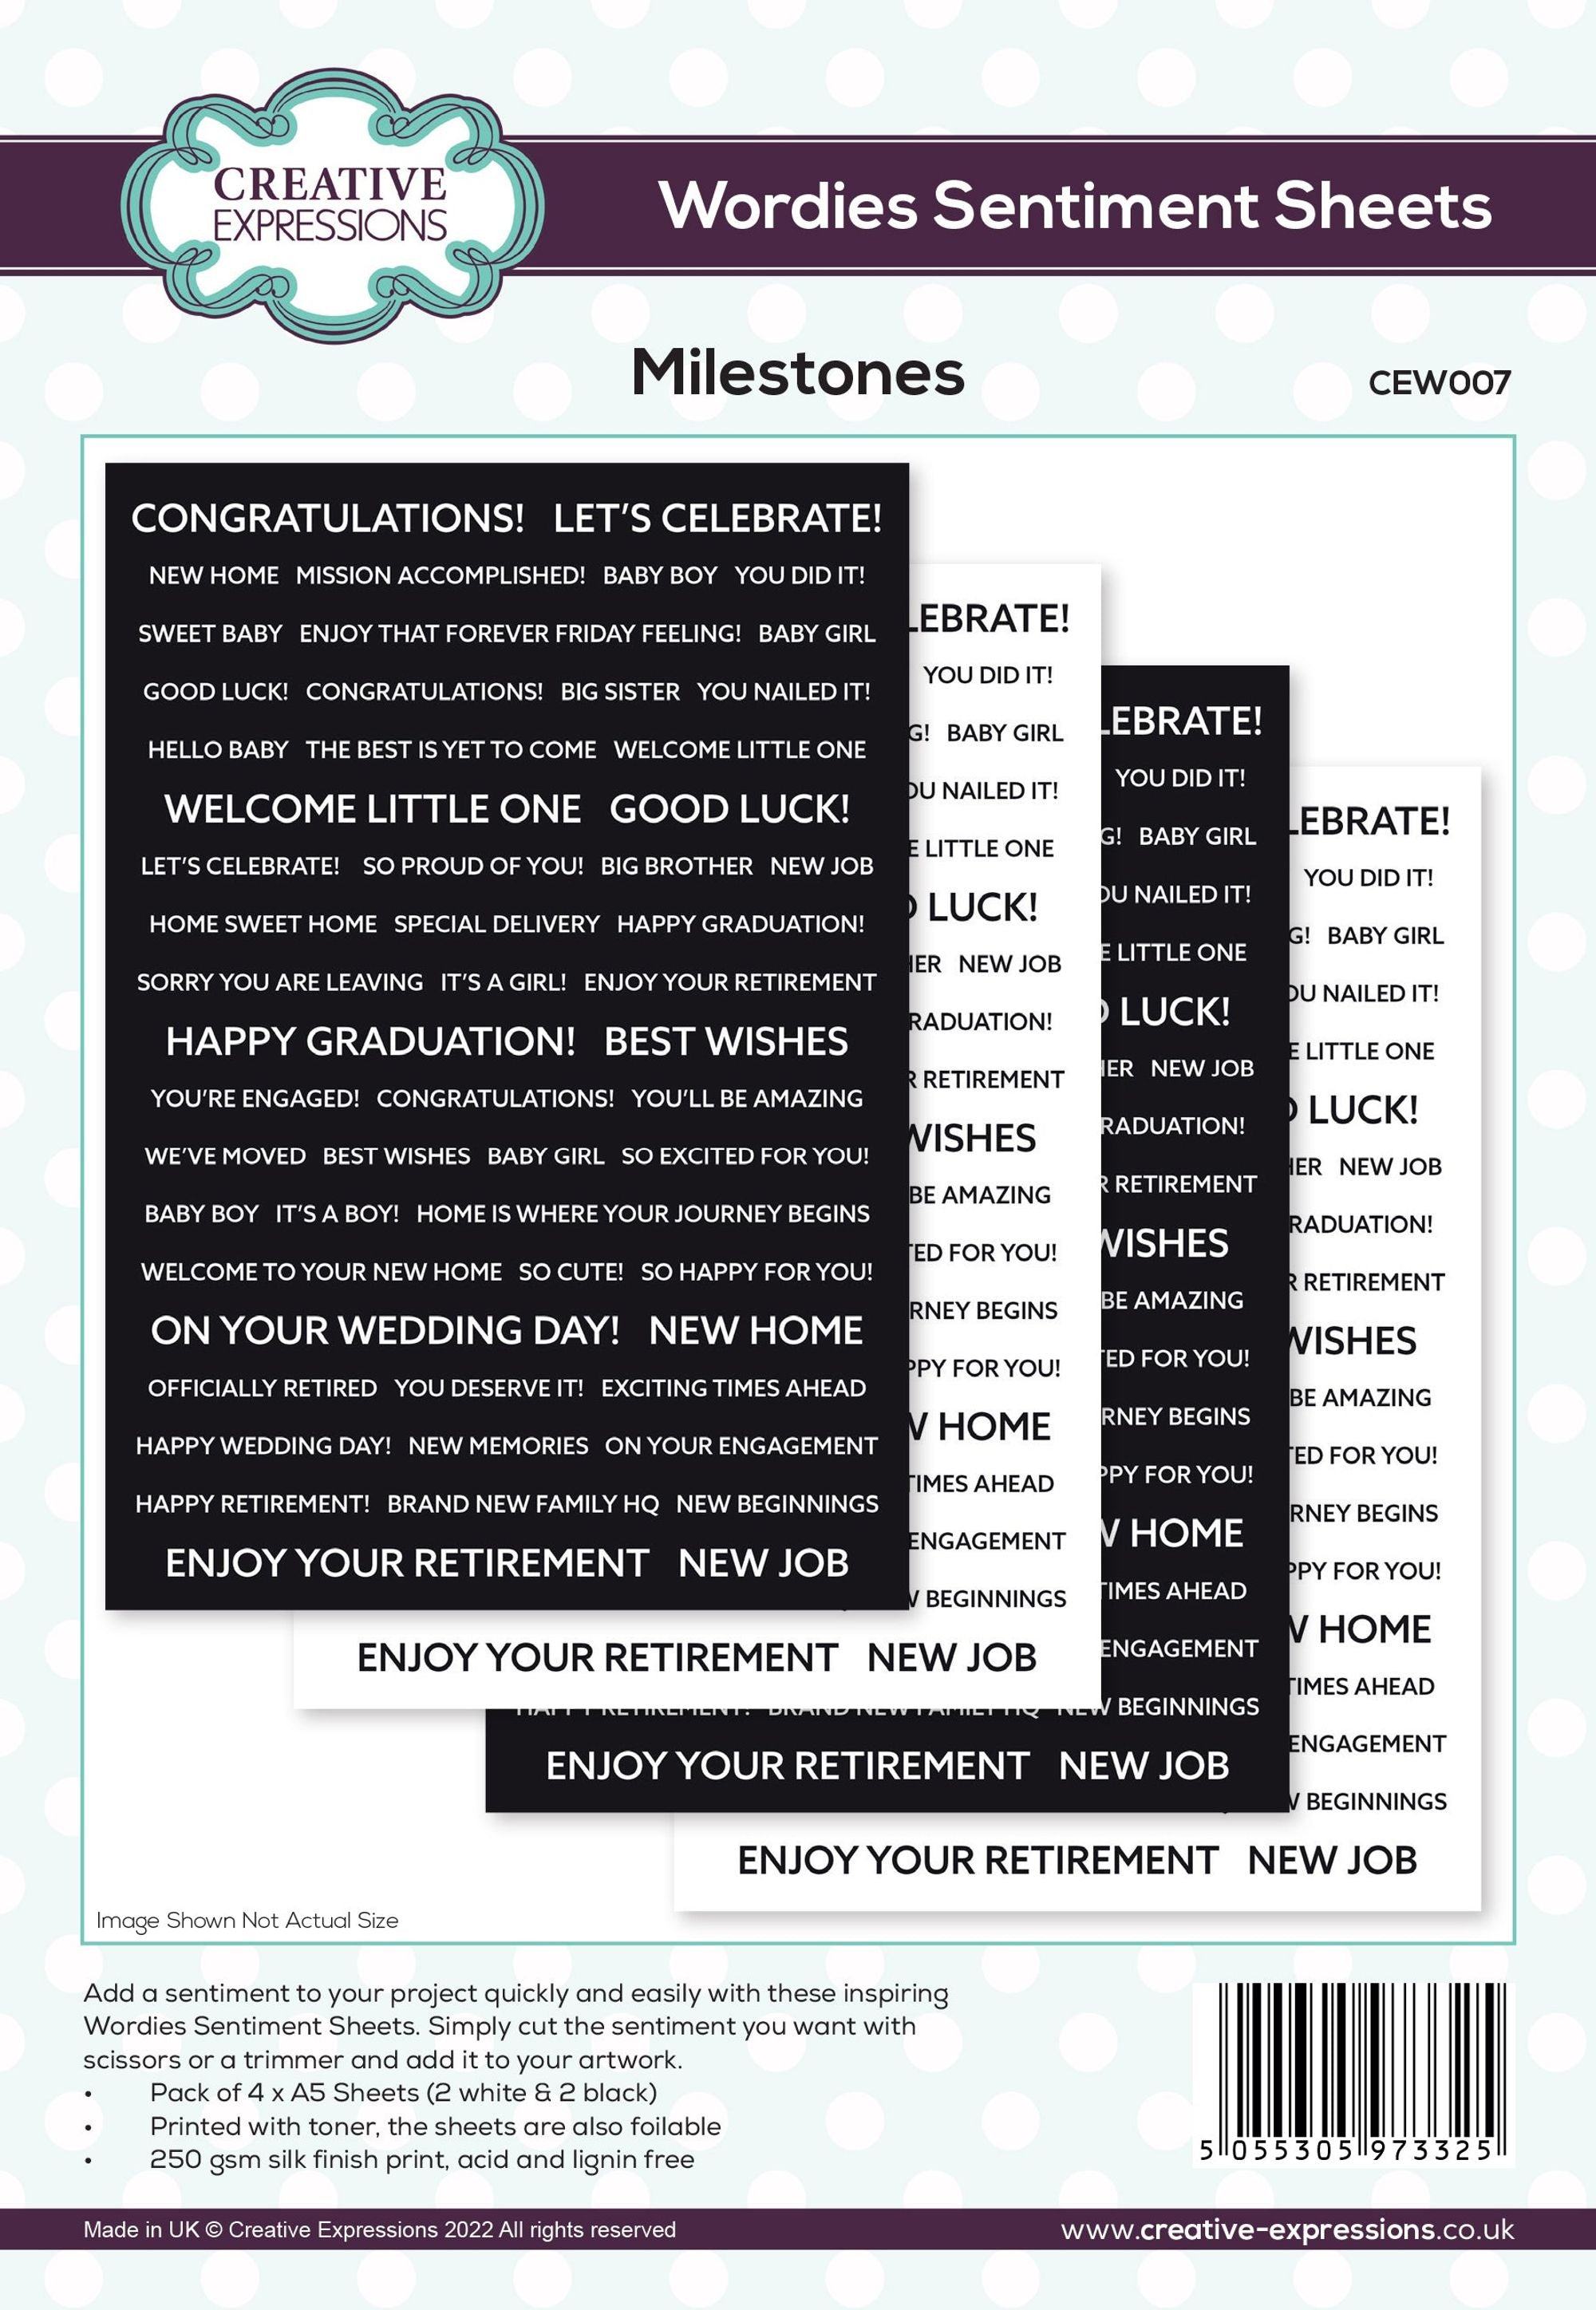 Creative Expressions Wordies Sentiment Sheets - Milestones  PK 4 6 in x 8 in